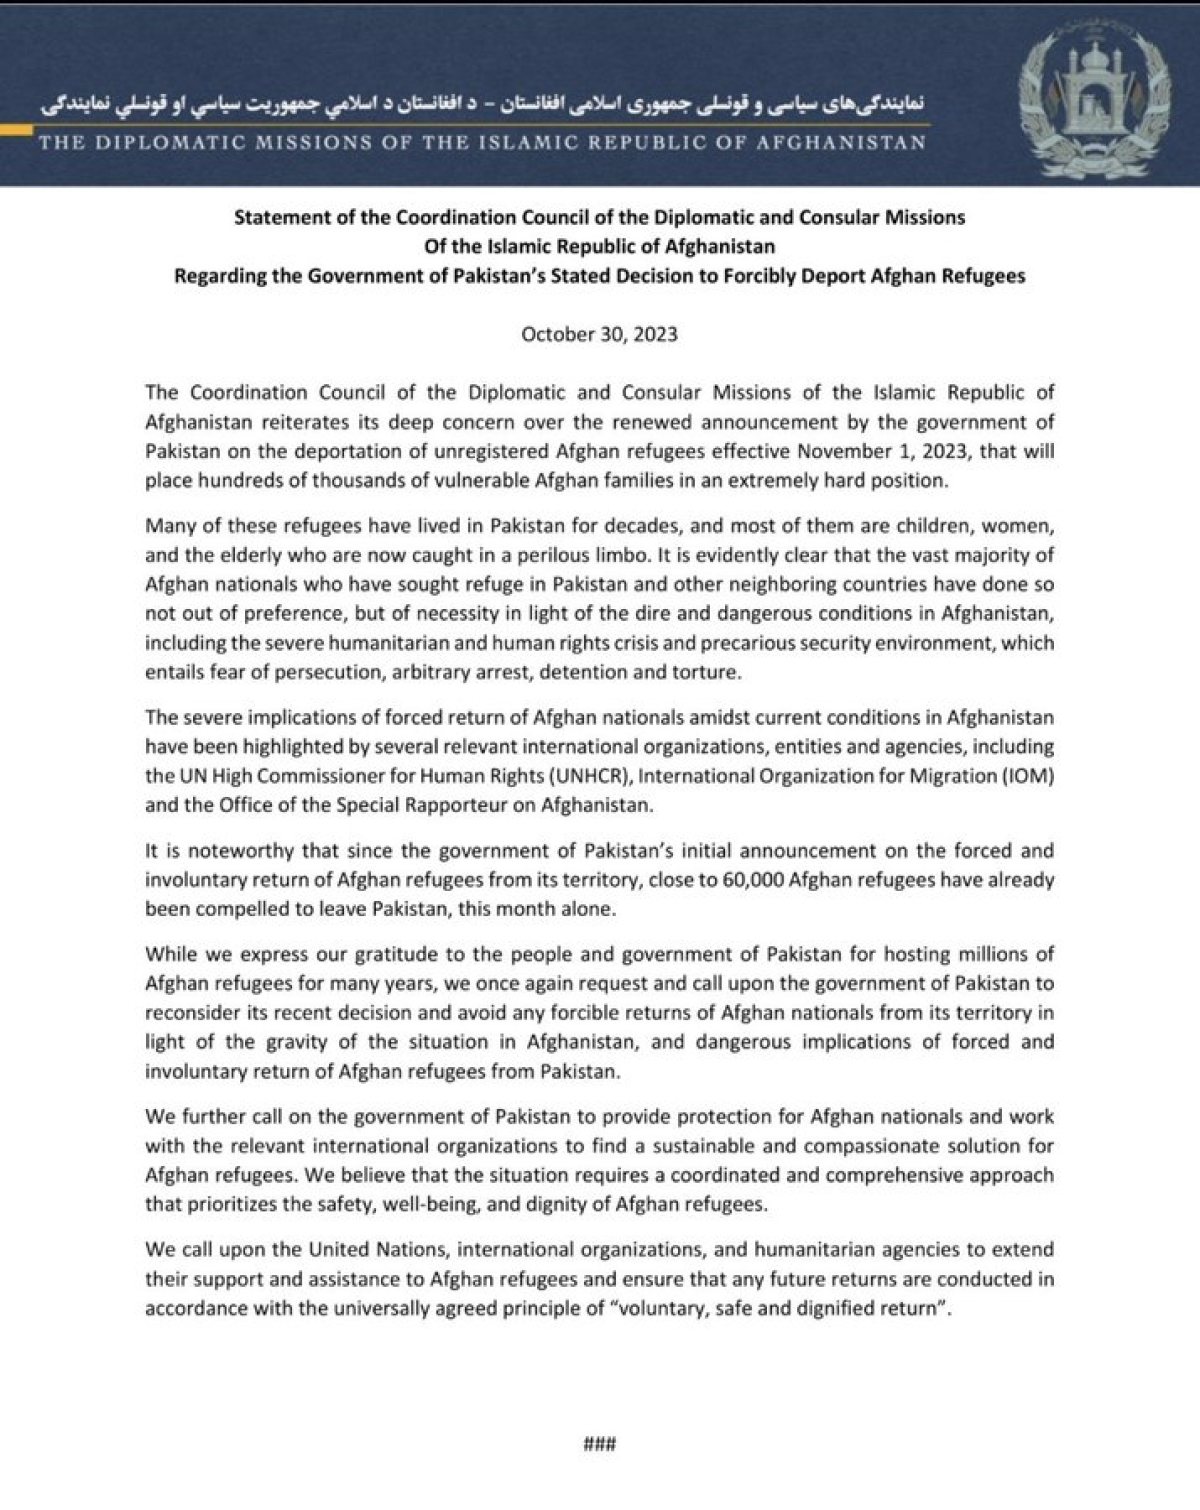 Statement of the Coordination Council of the Diplomatic and Consular Missions of the Islamic Republic of Afghanistan